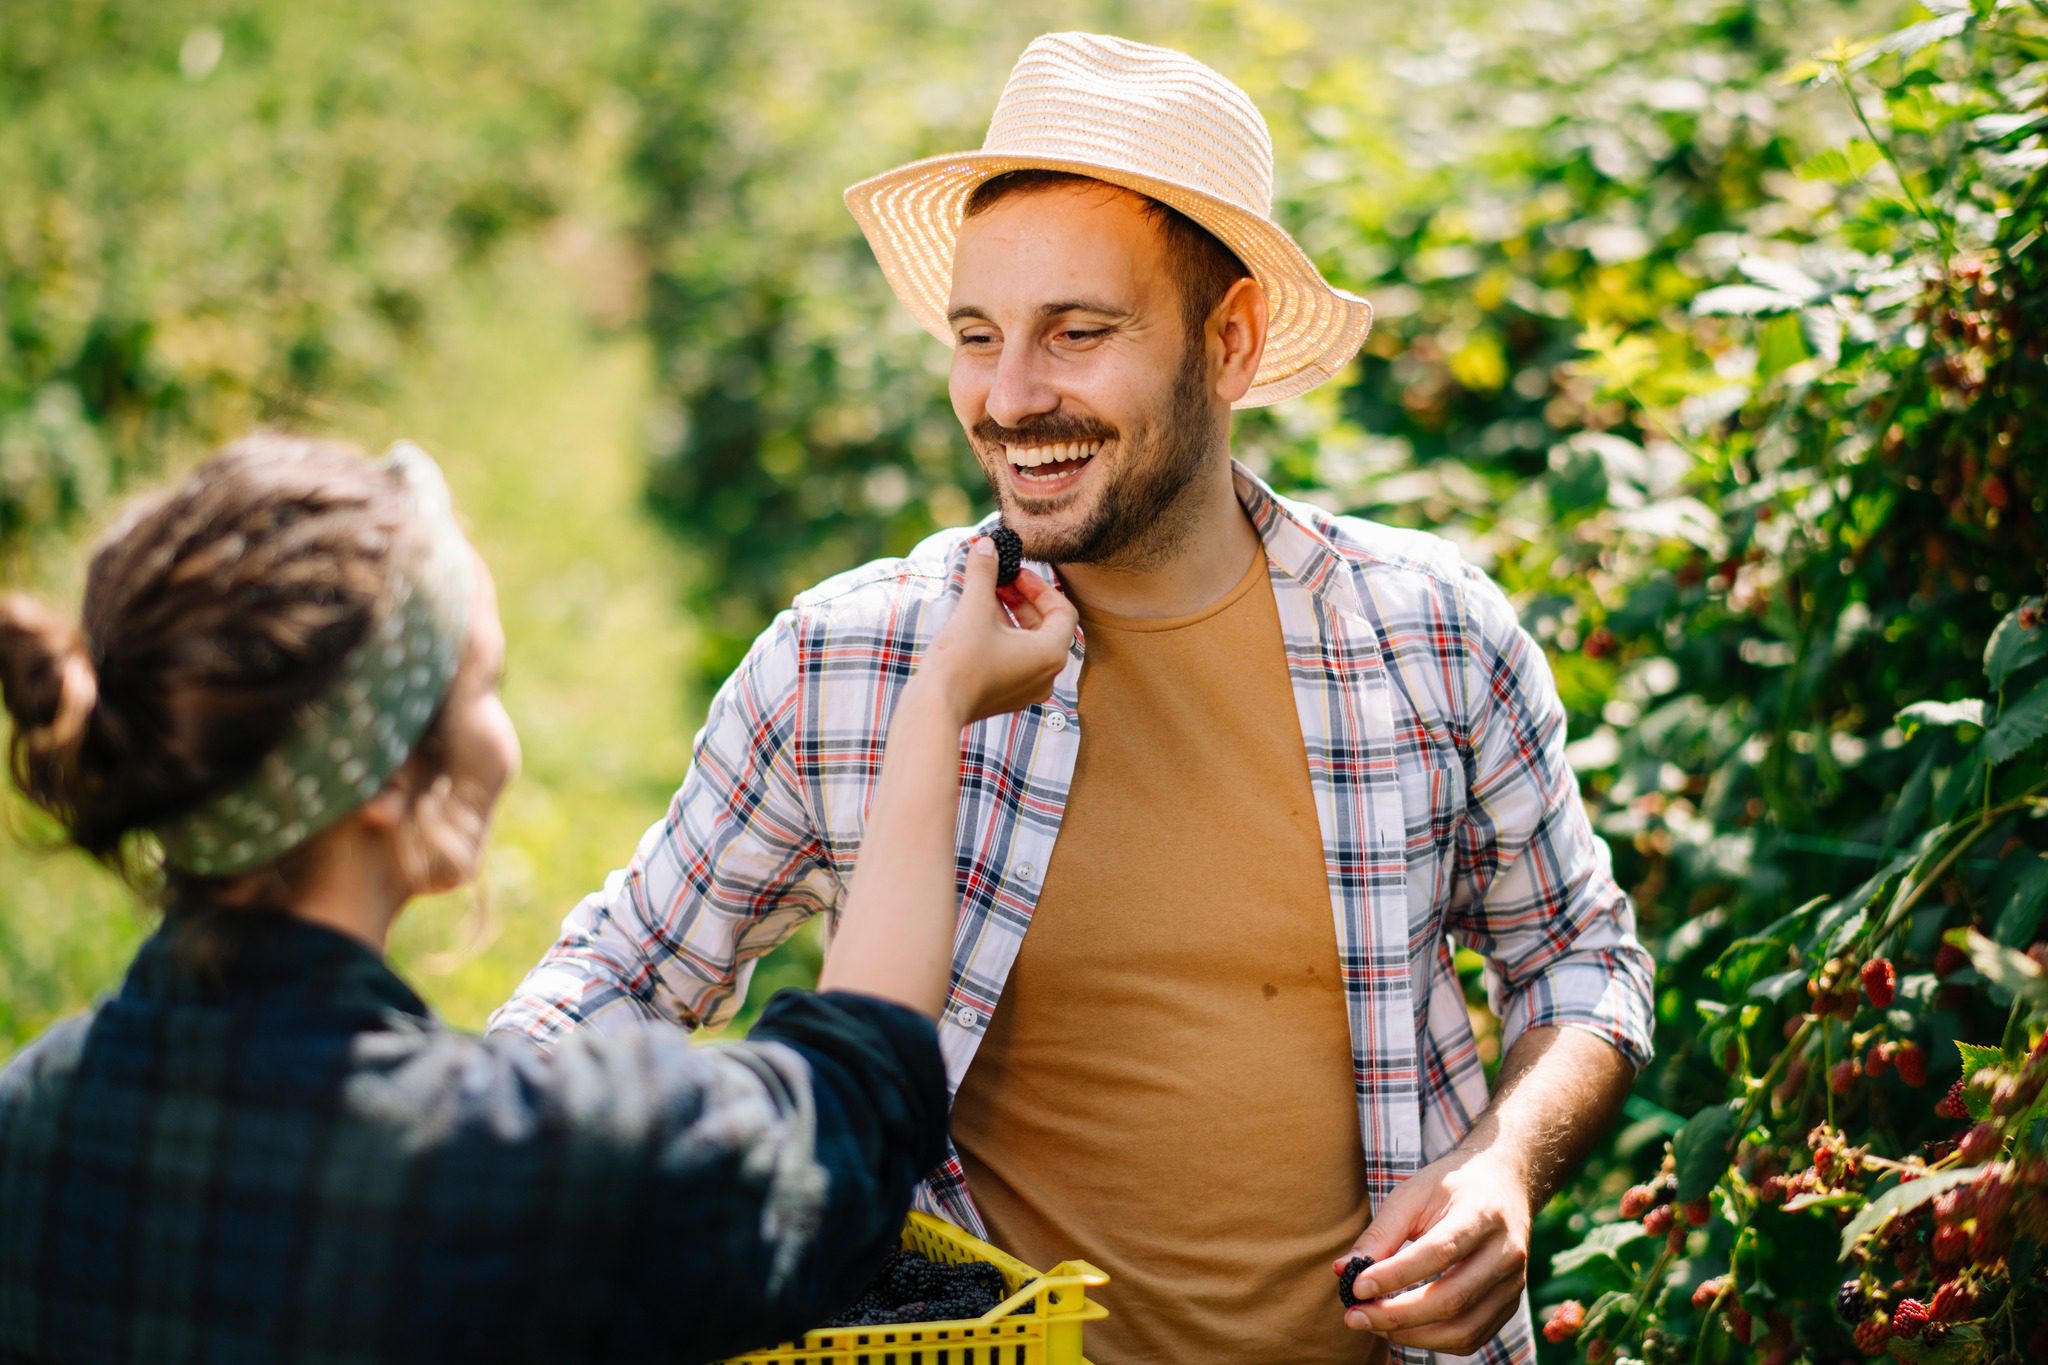 A smiling individual in a straw hat and plaid shirt is having fun picking berries on a sunny day.